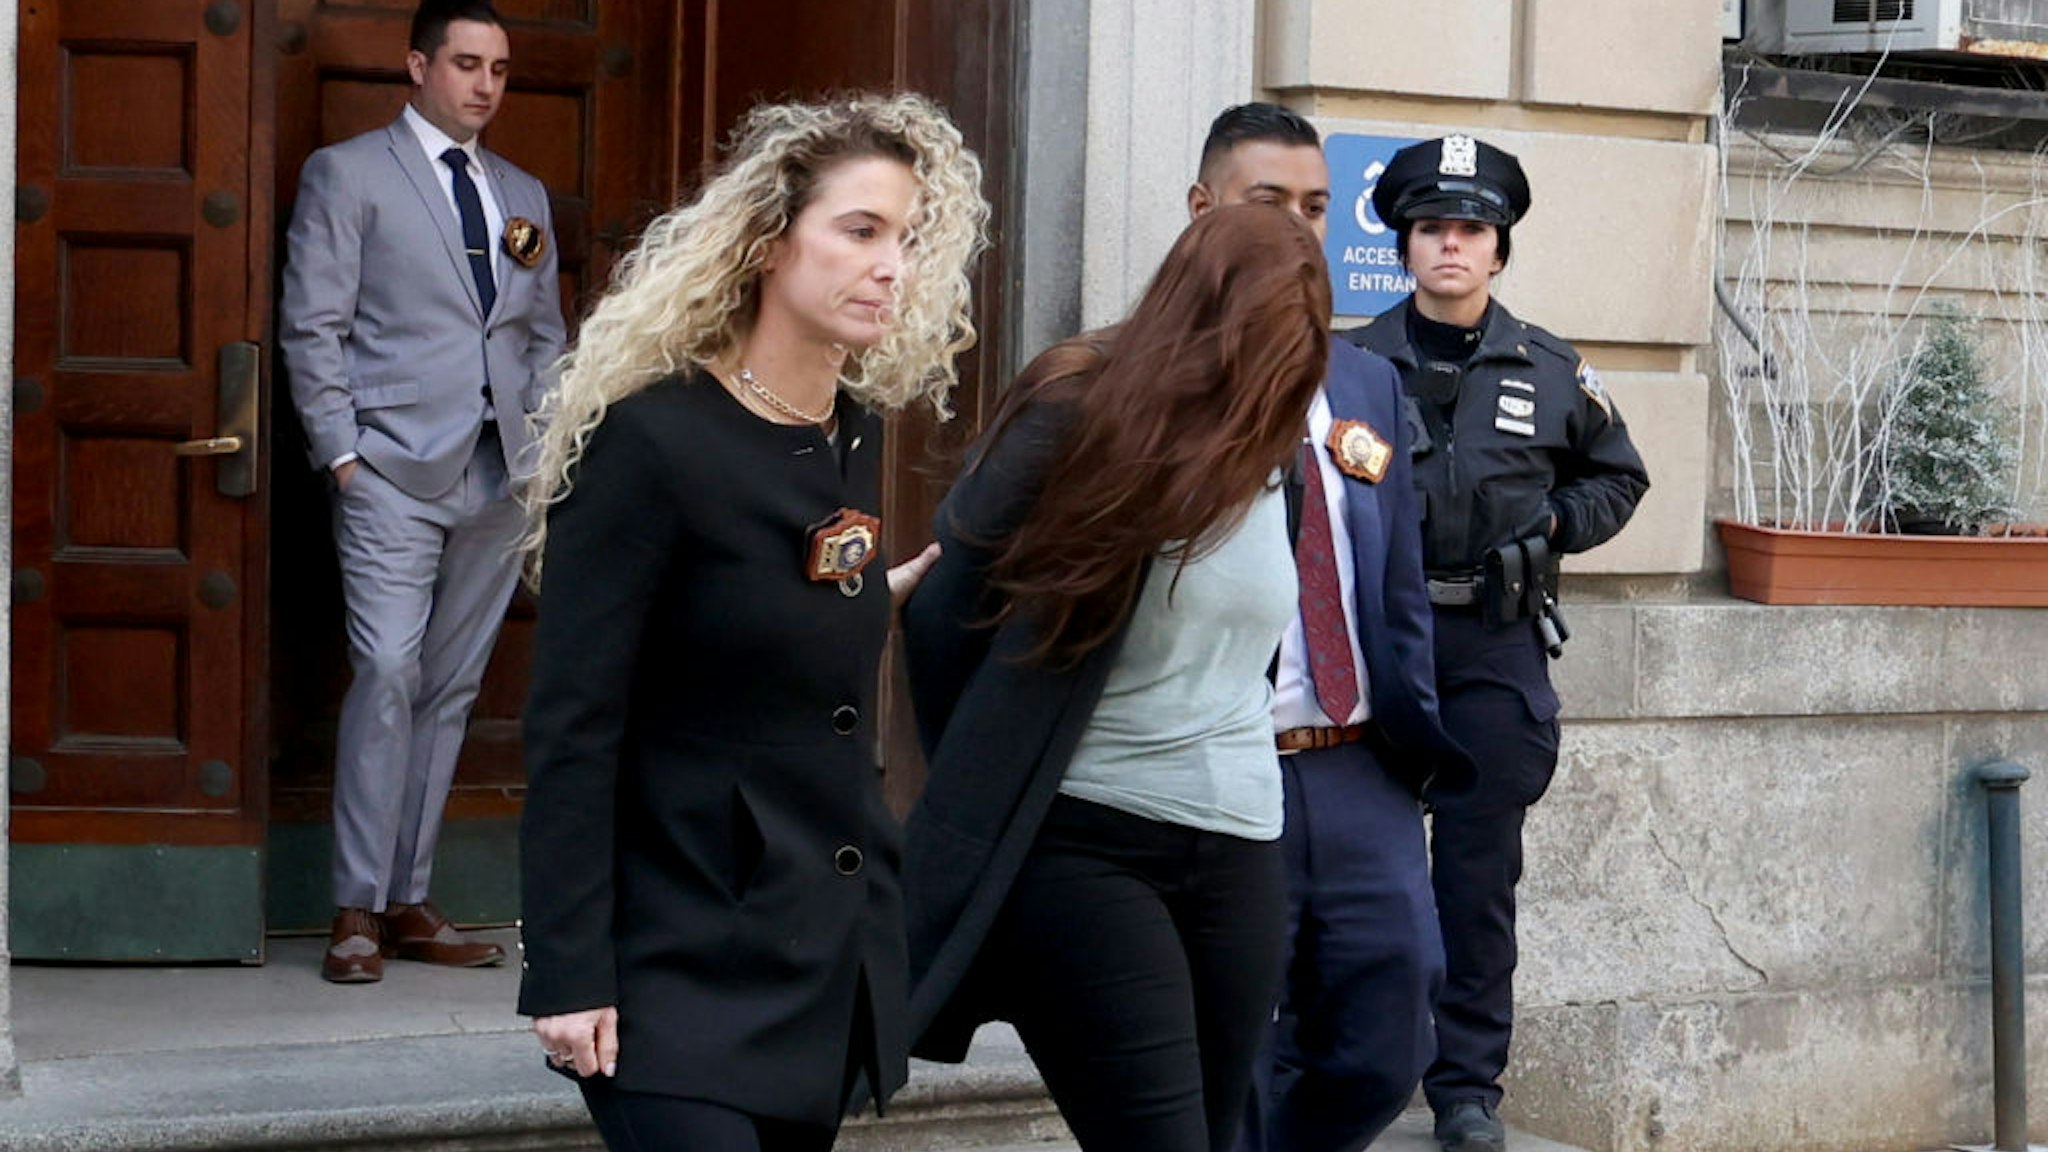 NYPD 10th Precinct Detectives walk 26 years old Lauren Pazienza to face Manslaughter charges for the shoving 87-year-old Lauren Maker Gustern. Lauren Pazienza, 26, turned herself at the NYPD 10th precinct and was charged with manslaughter for allegedly shoving Barbara Maier Gustern, 87, while running down a New York City street on March 10.